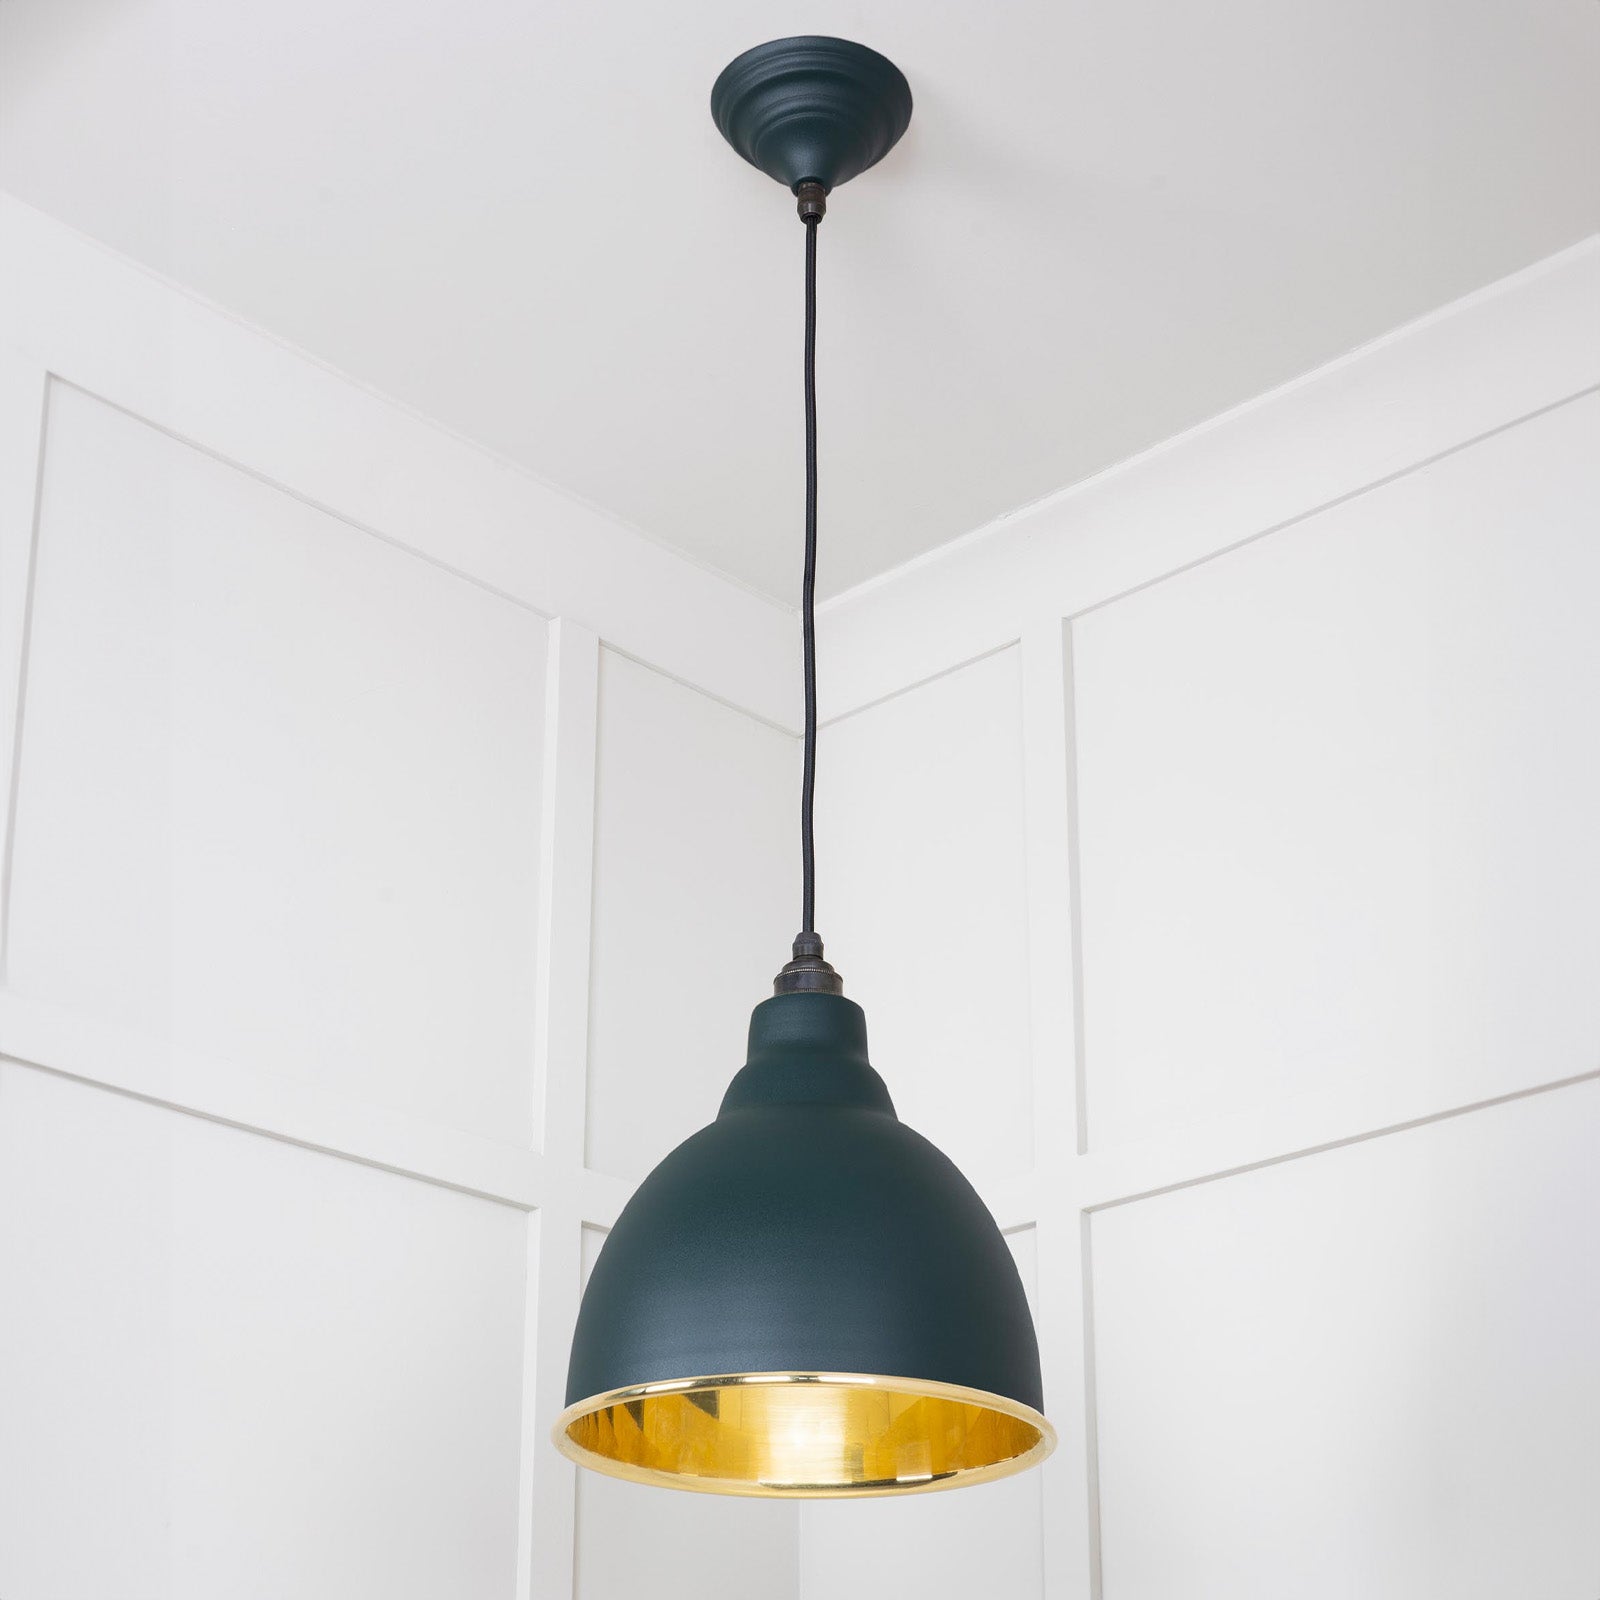 SHOW Full Image of Hanging Brindley Ceiling Light in Dingle